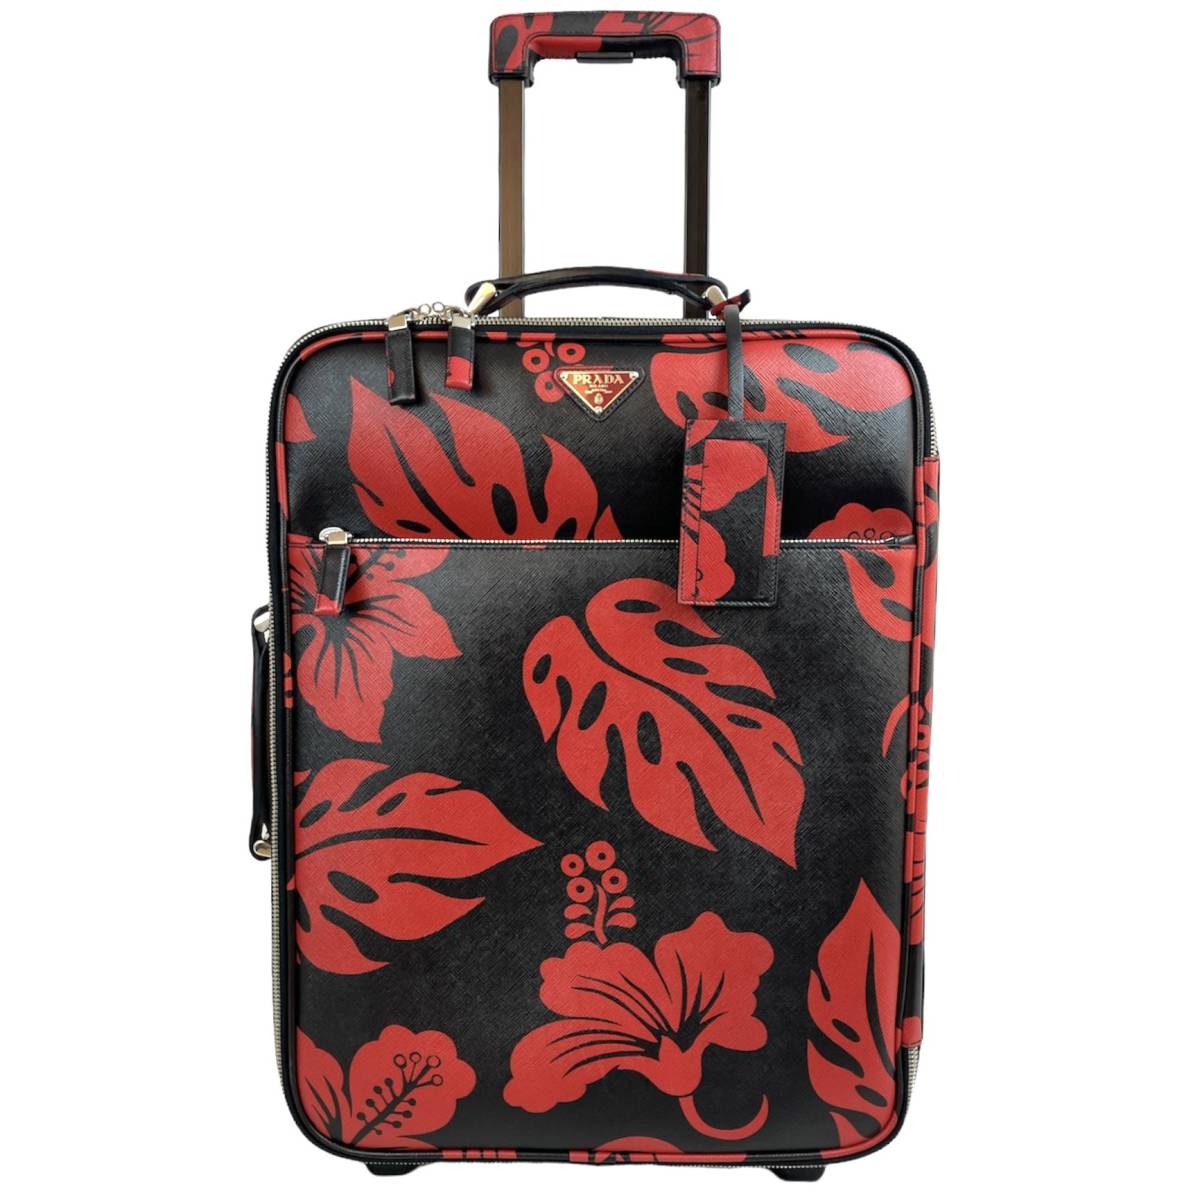 rare! PRADA Limited edition Hibiscus printed trolley travel bag carry SAFFIANO leather suitcase flower red black プラダ バッグ